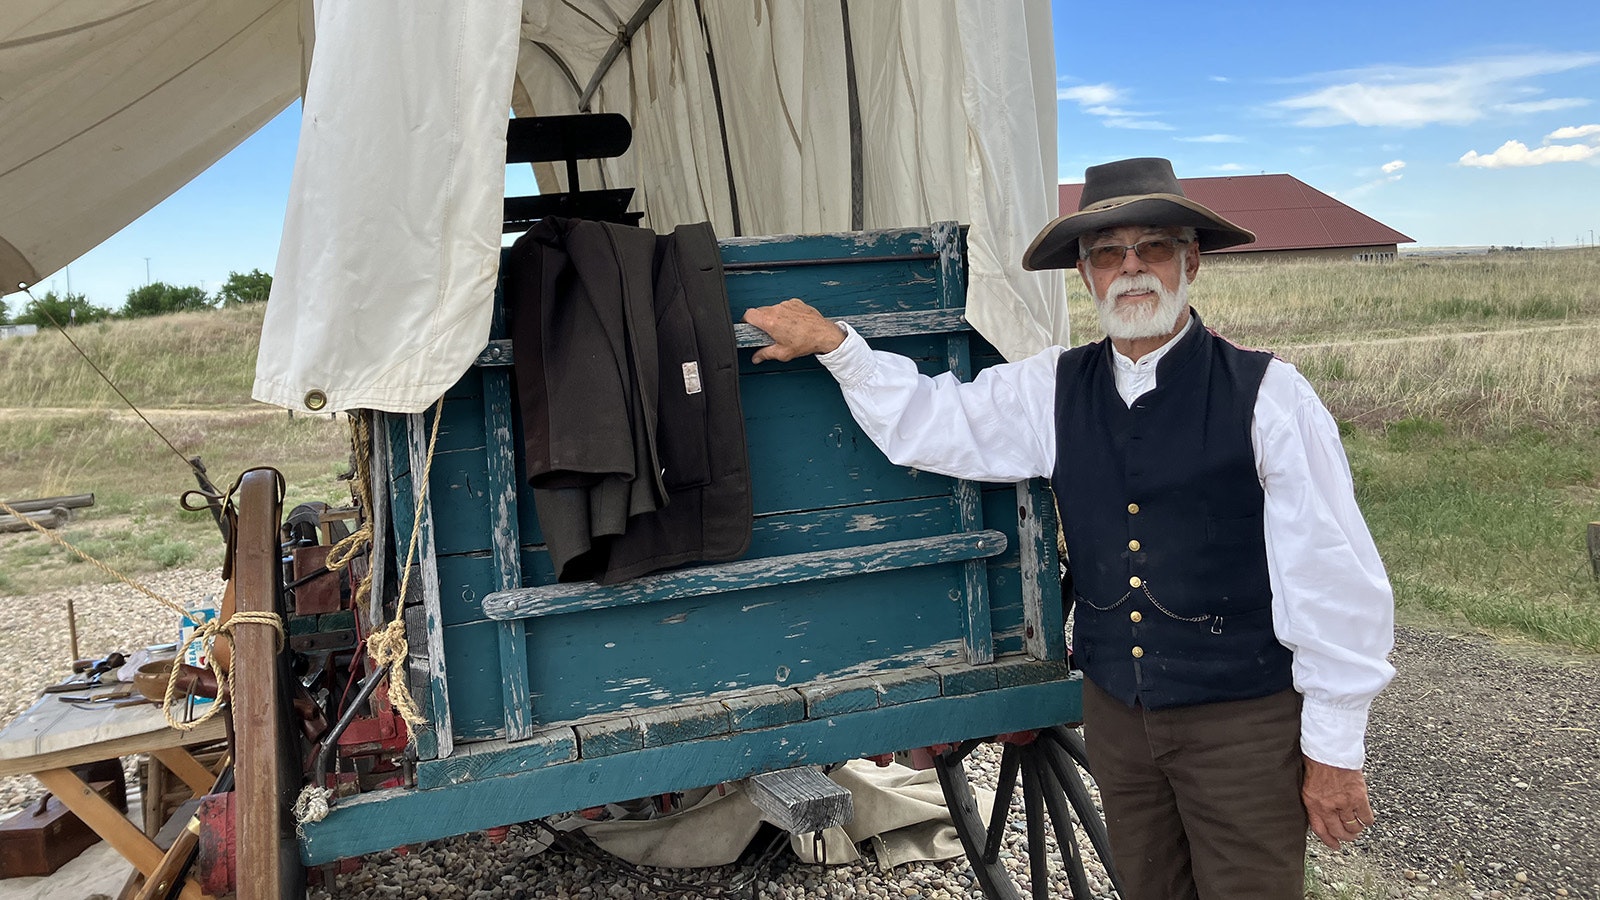 Kim Merchant built his covered wagon in 2001 and then joined wagon train reenactment from Fort Laramie, Wyoming to Virginia City, Montana. He said he learned patience on the trip.